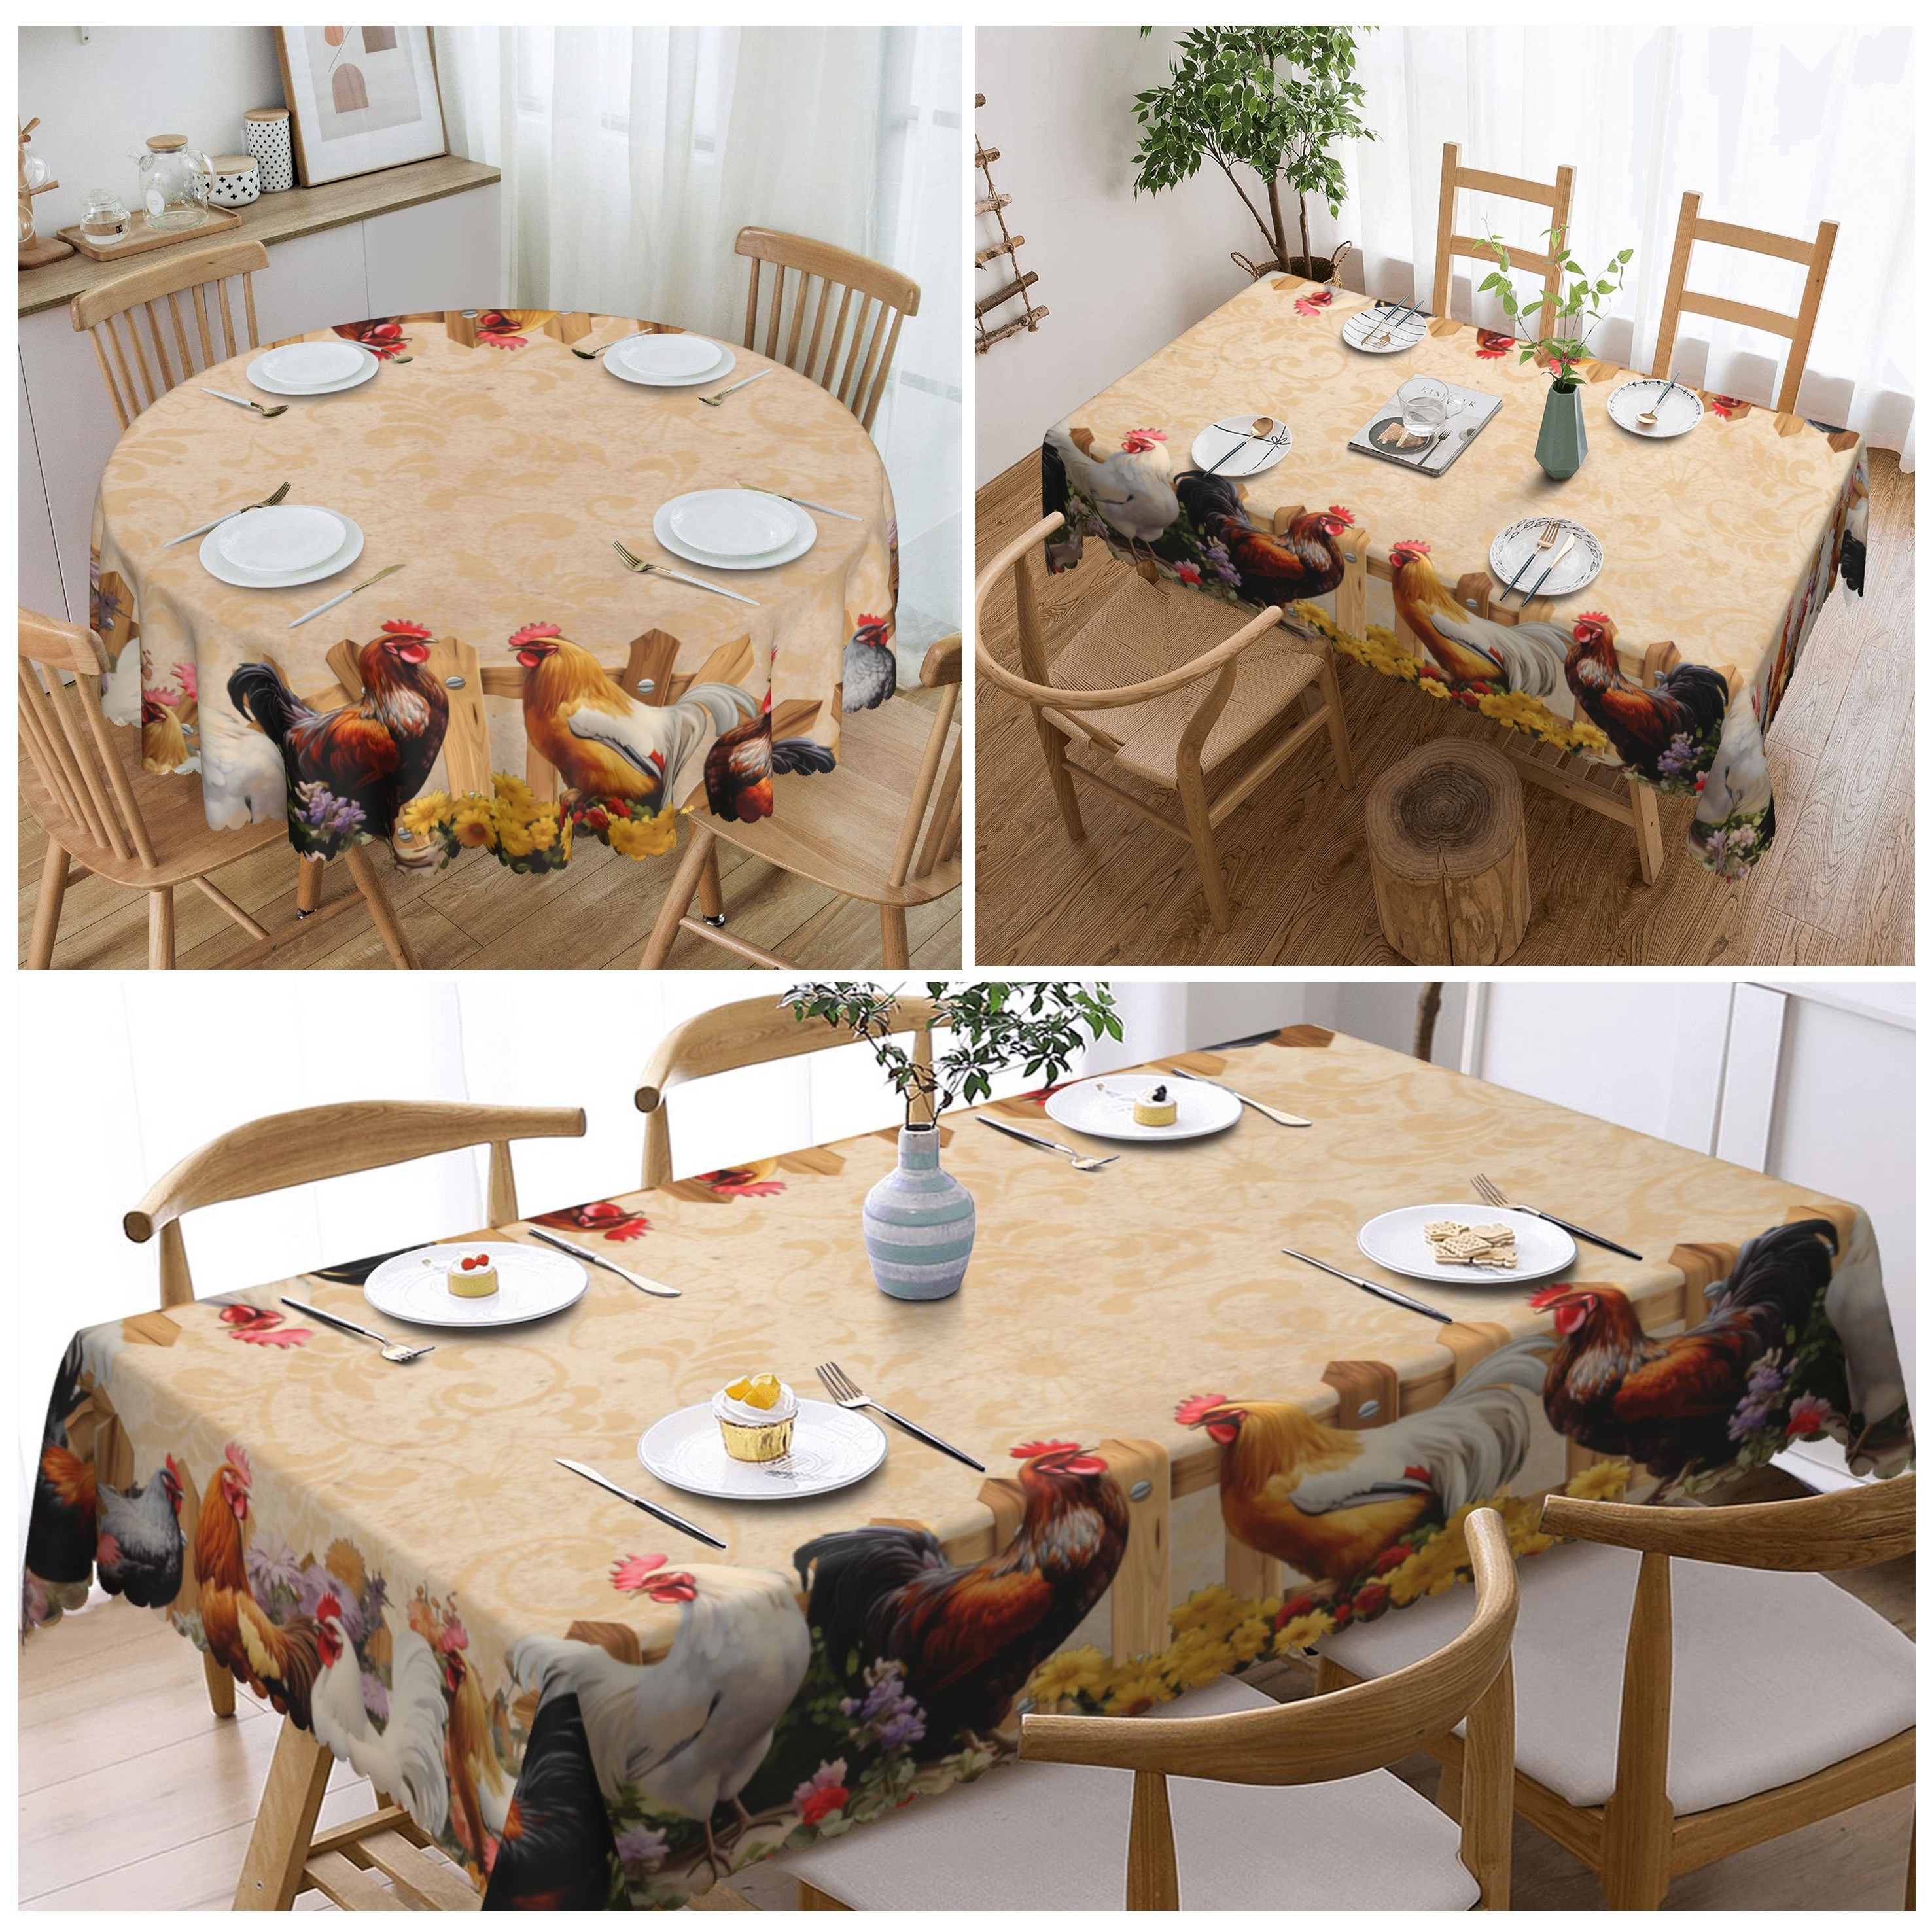 

1pc Table Cloth, Vintage Stain Resistant Rooster Tablecloth, Waterproof And Oilproof Table Cloth, Washable Polyester Chicken Table Cover, For Kitchen, Dining, Picnic And Party Decor, Home Supplies